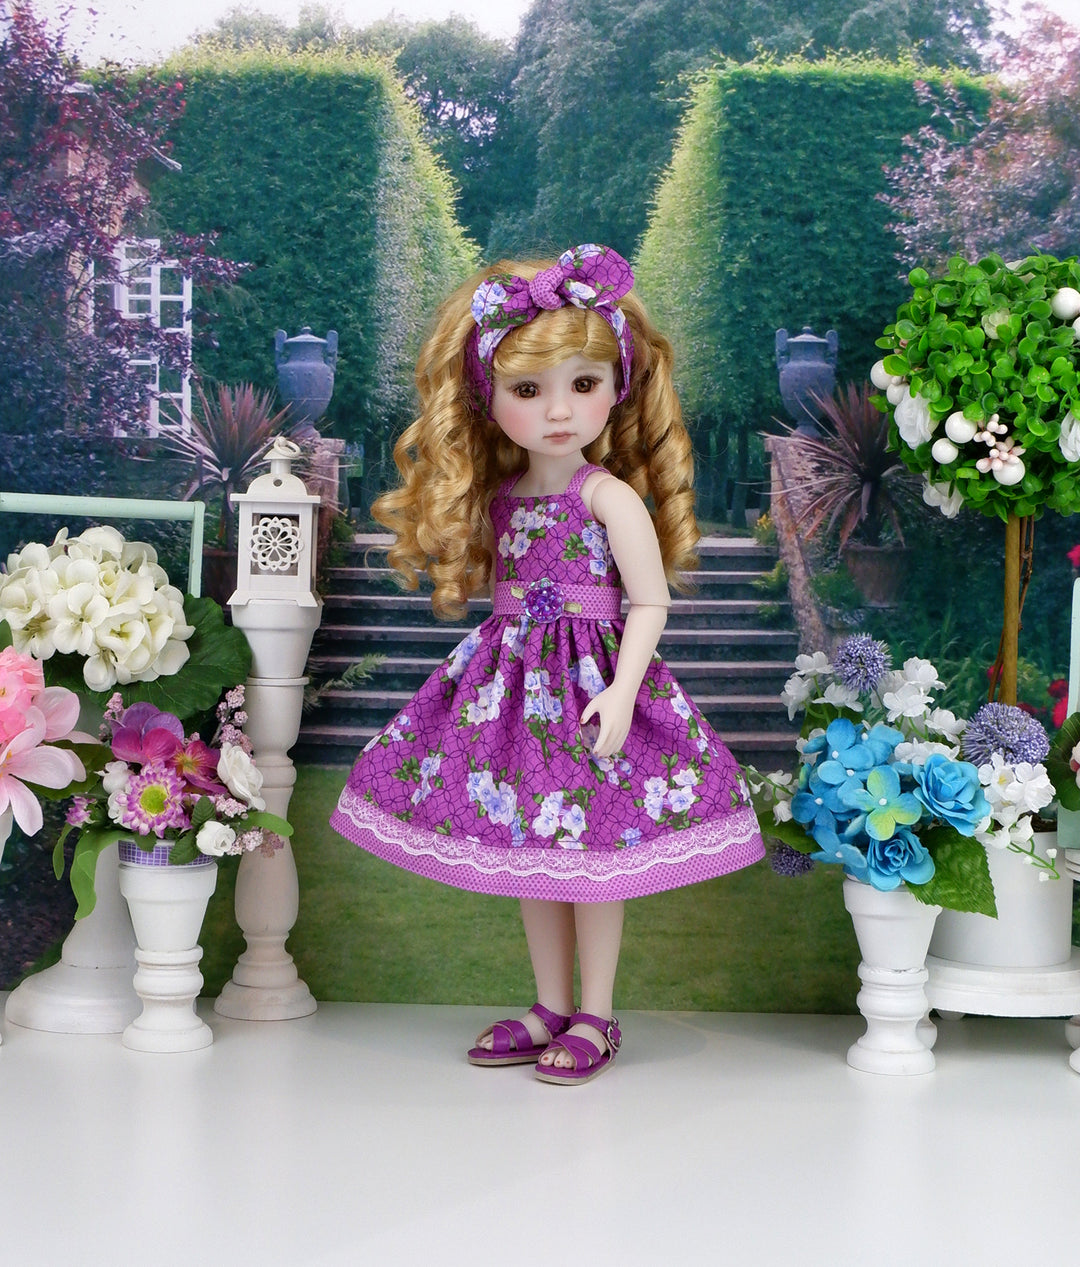 Blooming Periwinkle - dress with sandals for Ruby Red Fashion Friends doll